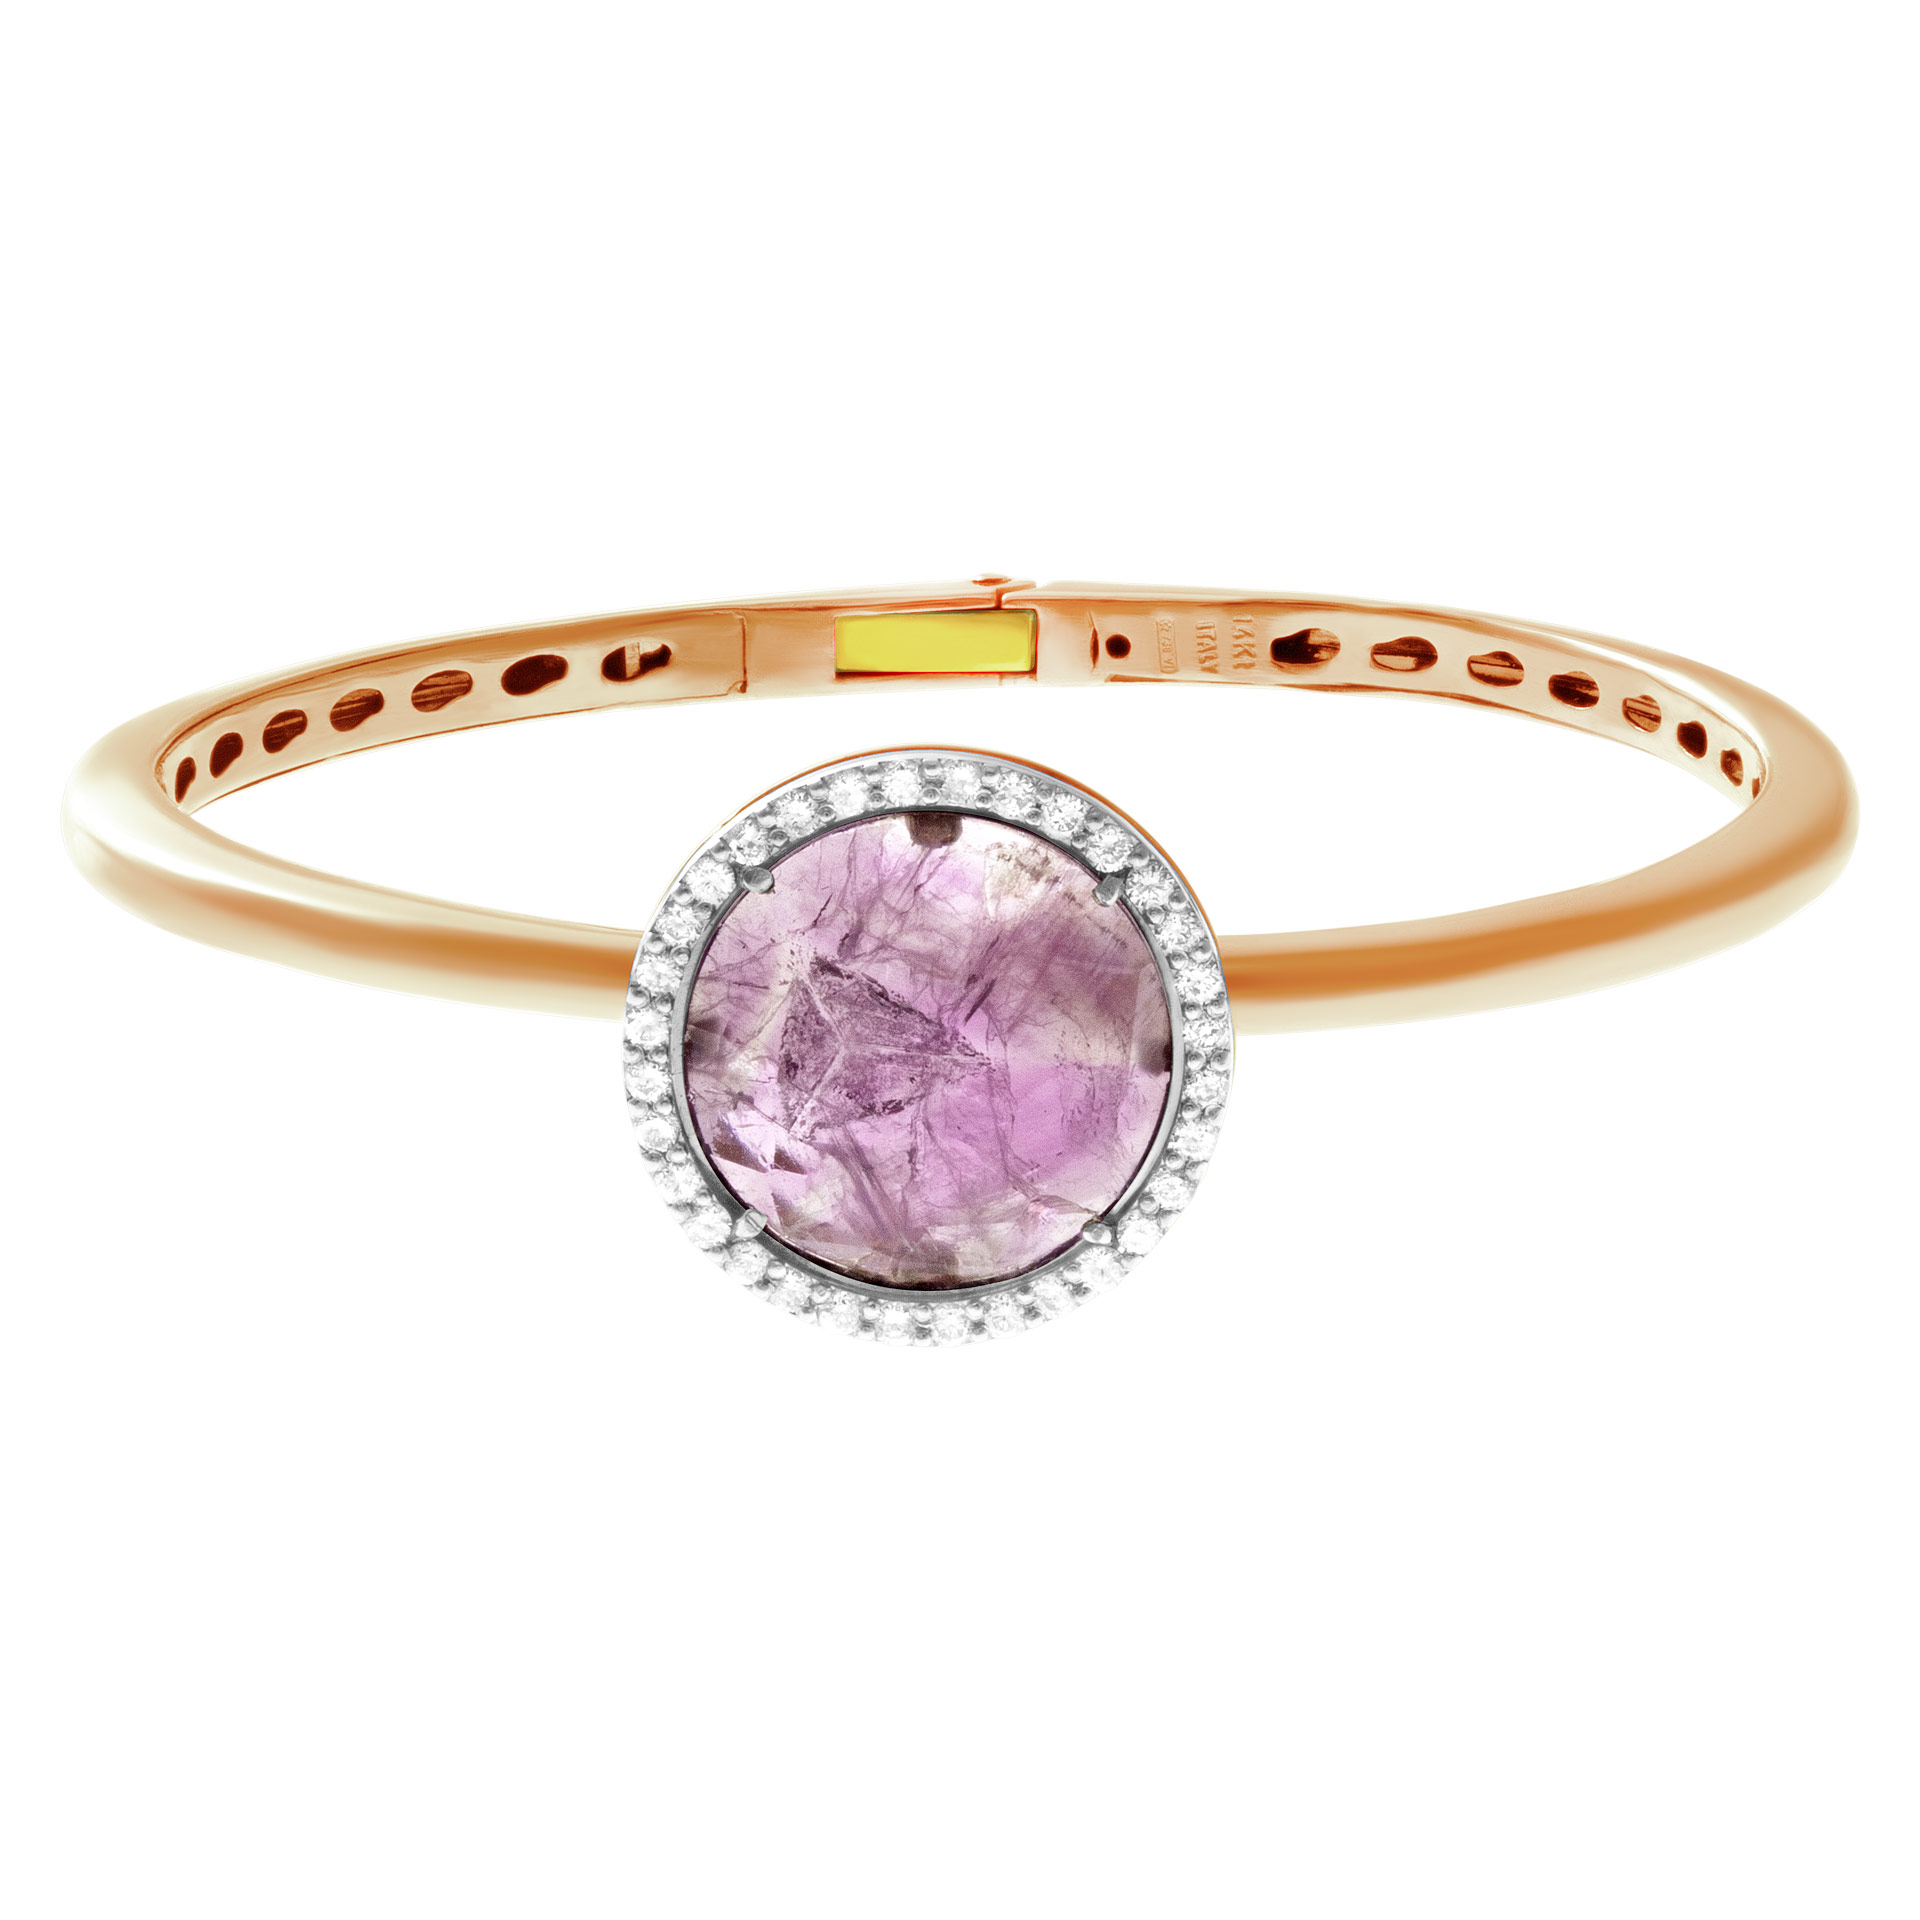 Amethyst bangle in 14k rose gold with clean cut diamond accents